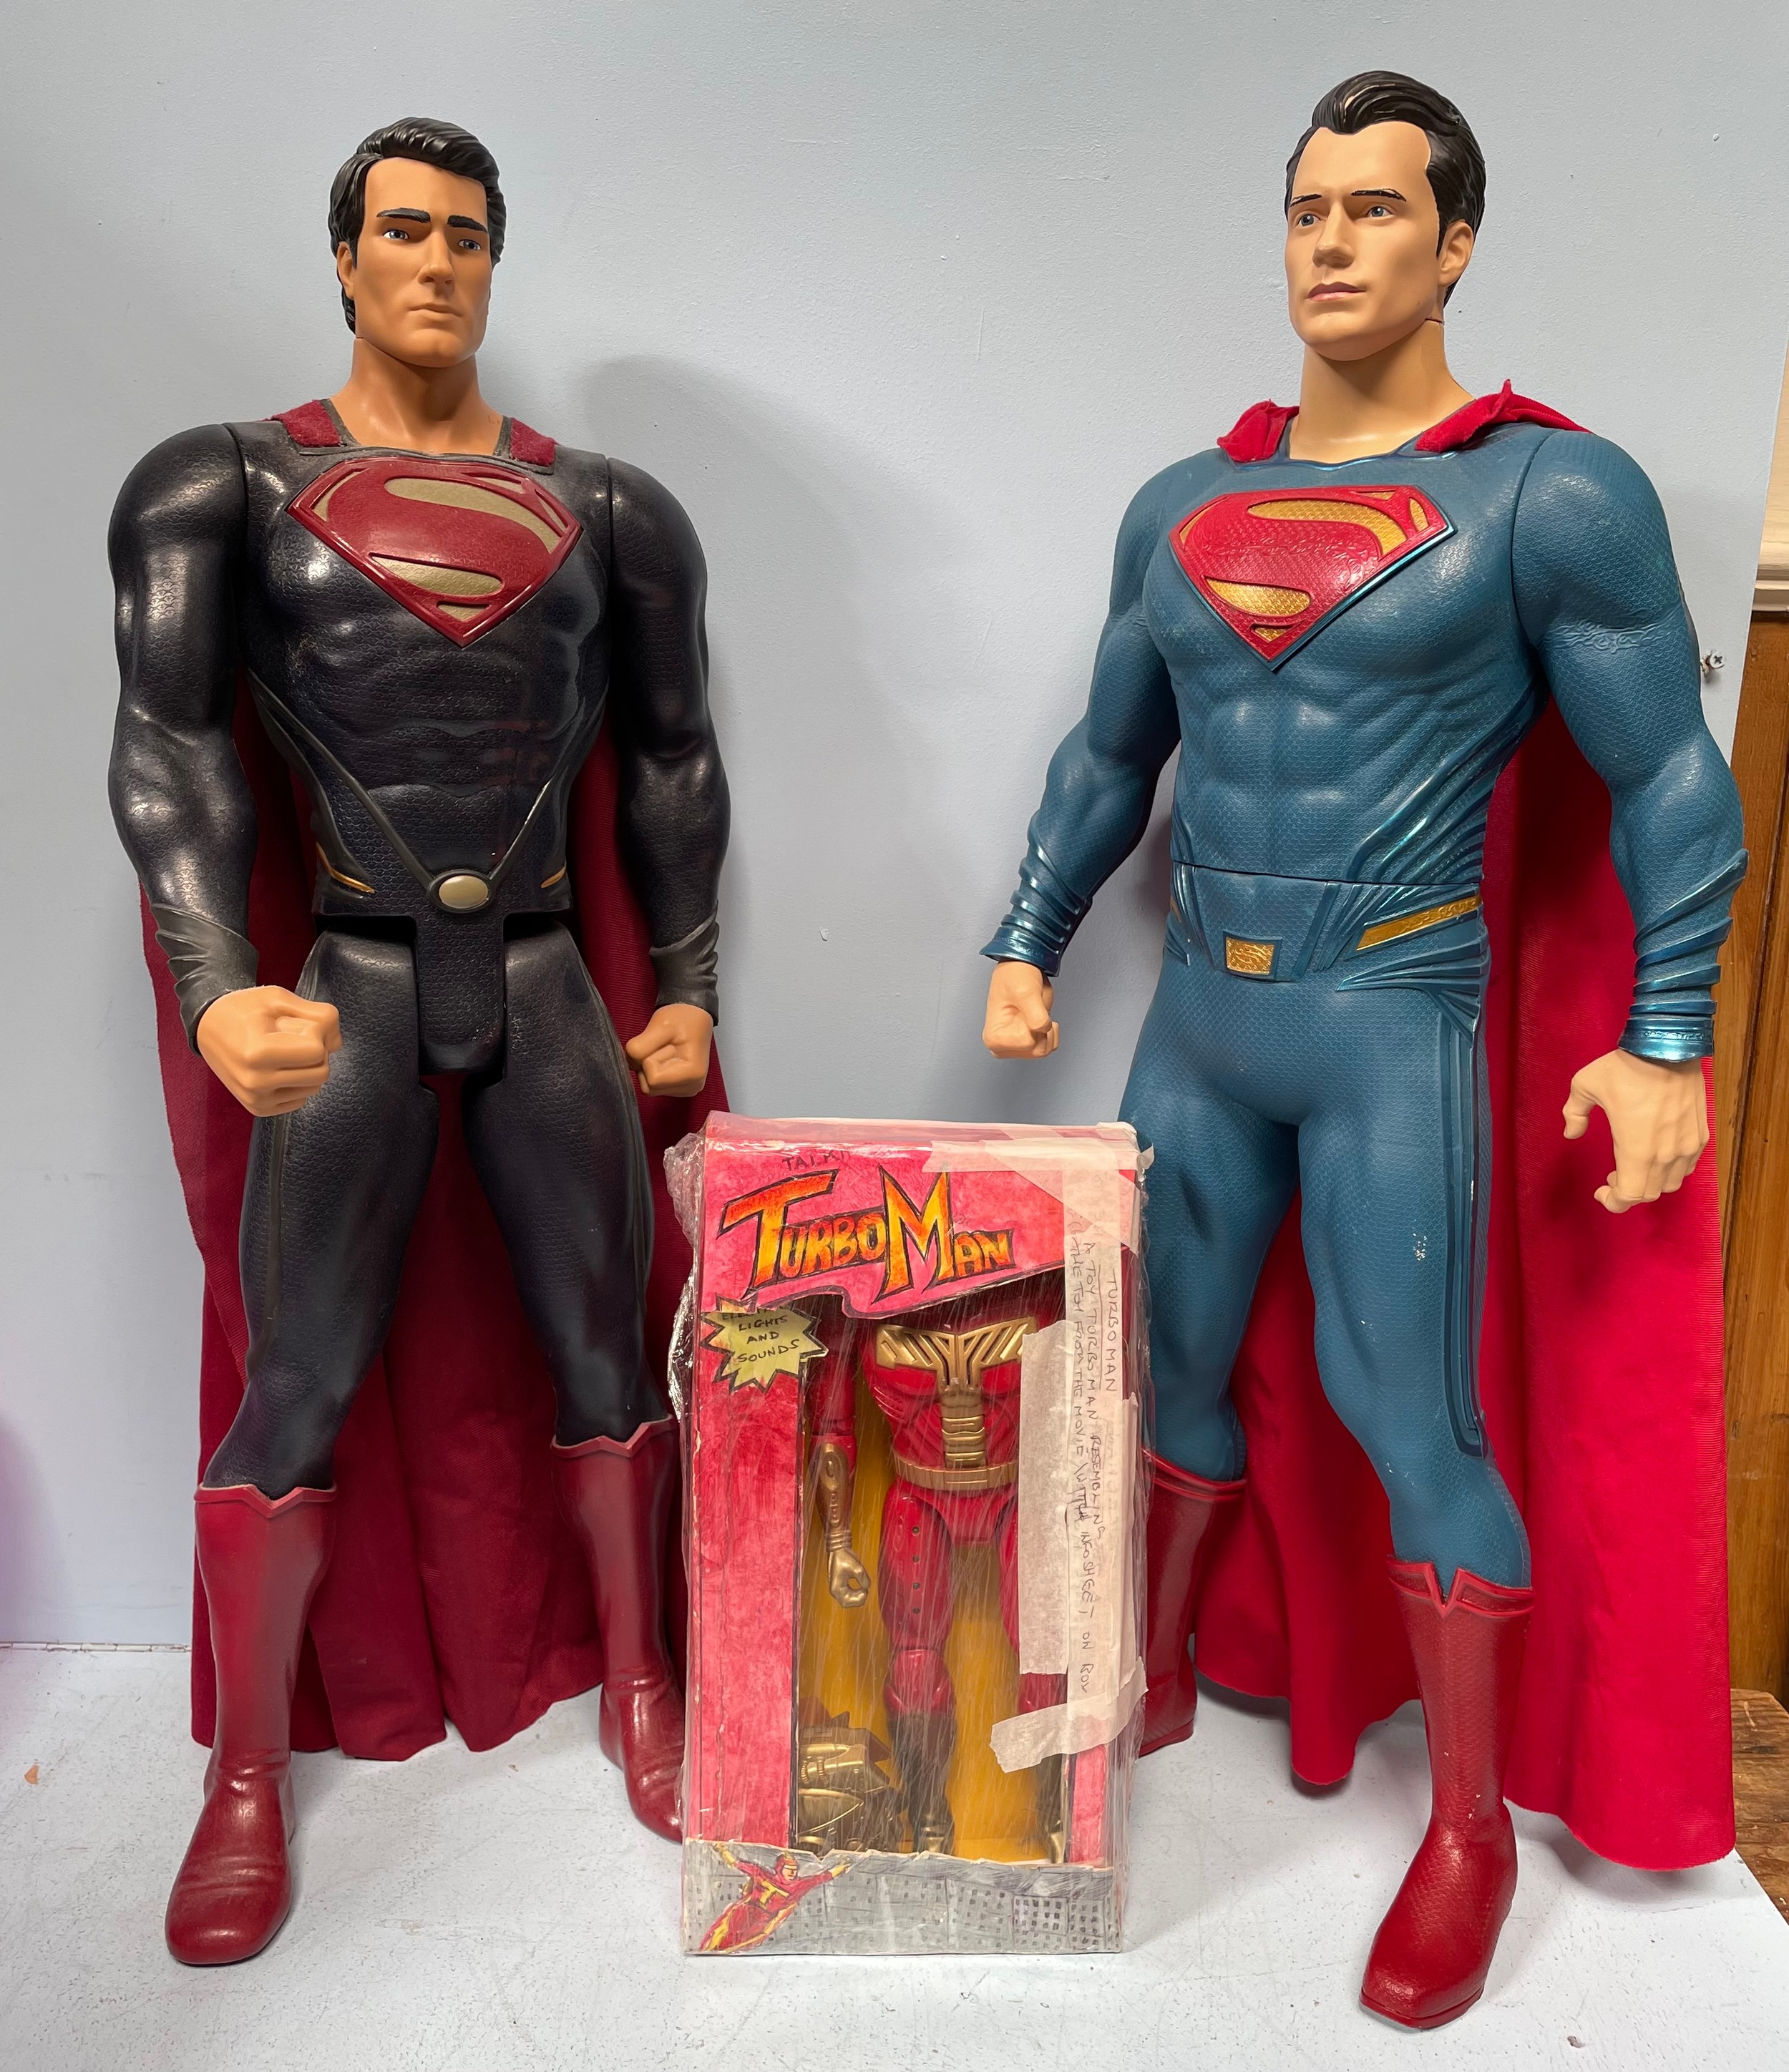 Two large Superman figures by Jakks, 80cm high, together with a Turboman doll from the film Jingle